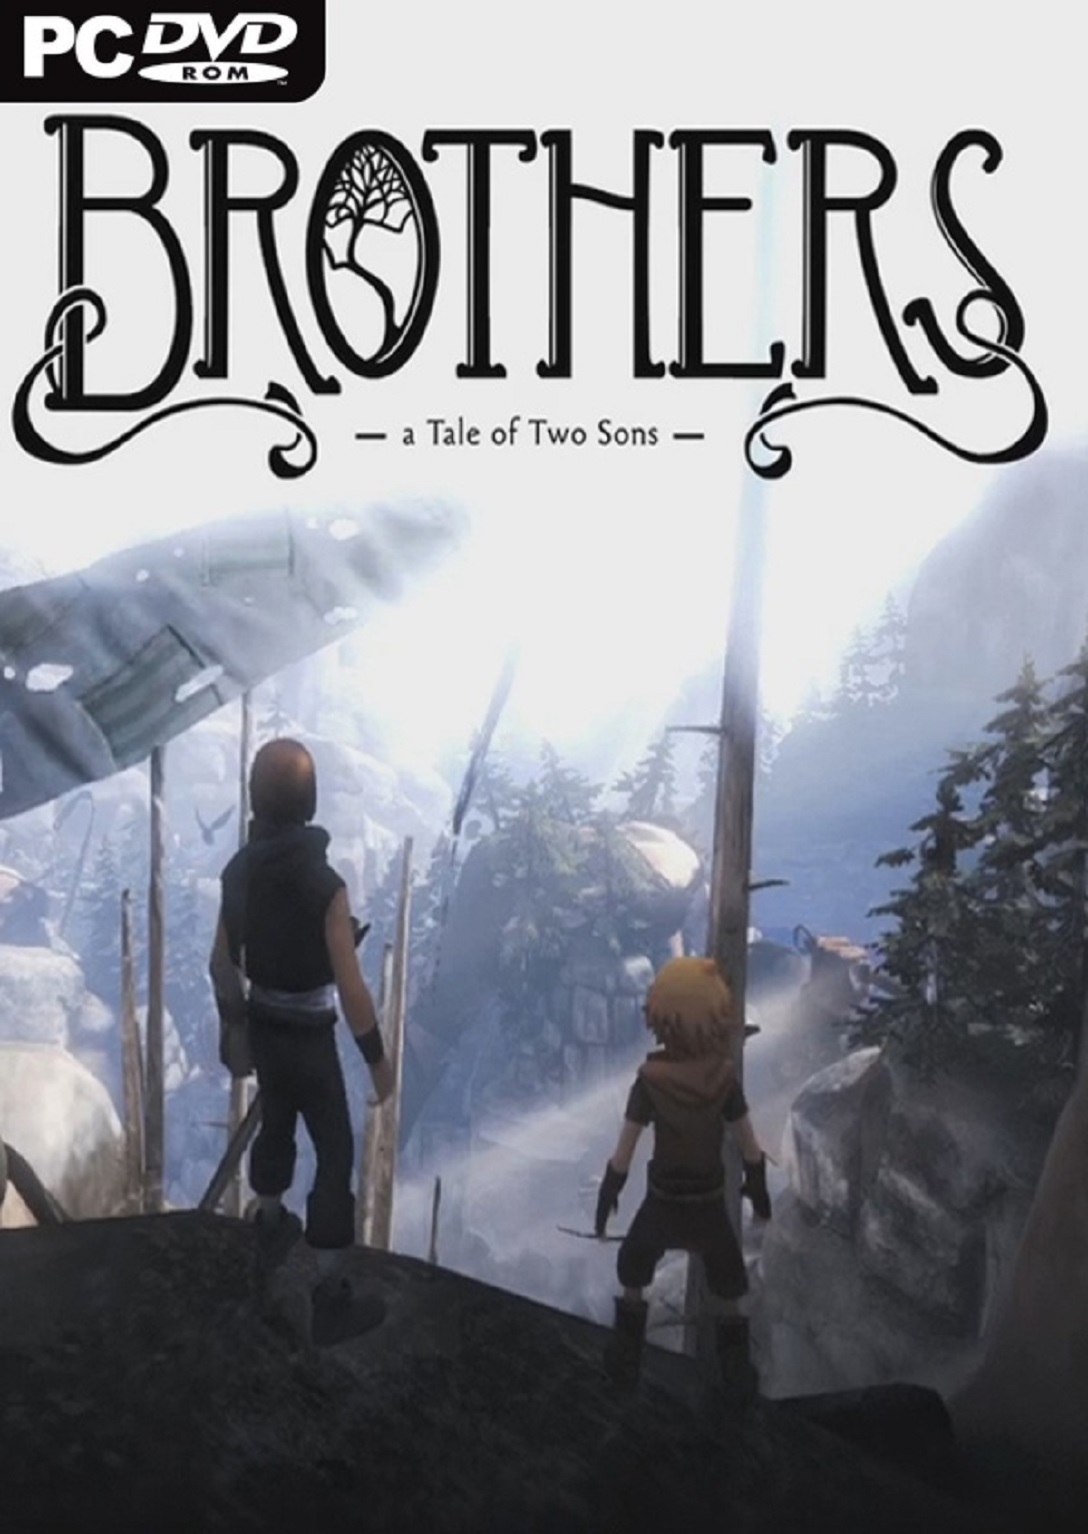 tale of two brothers game download